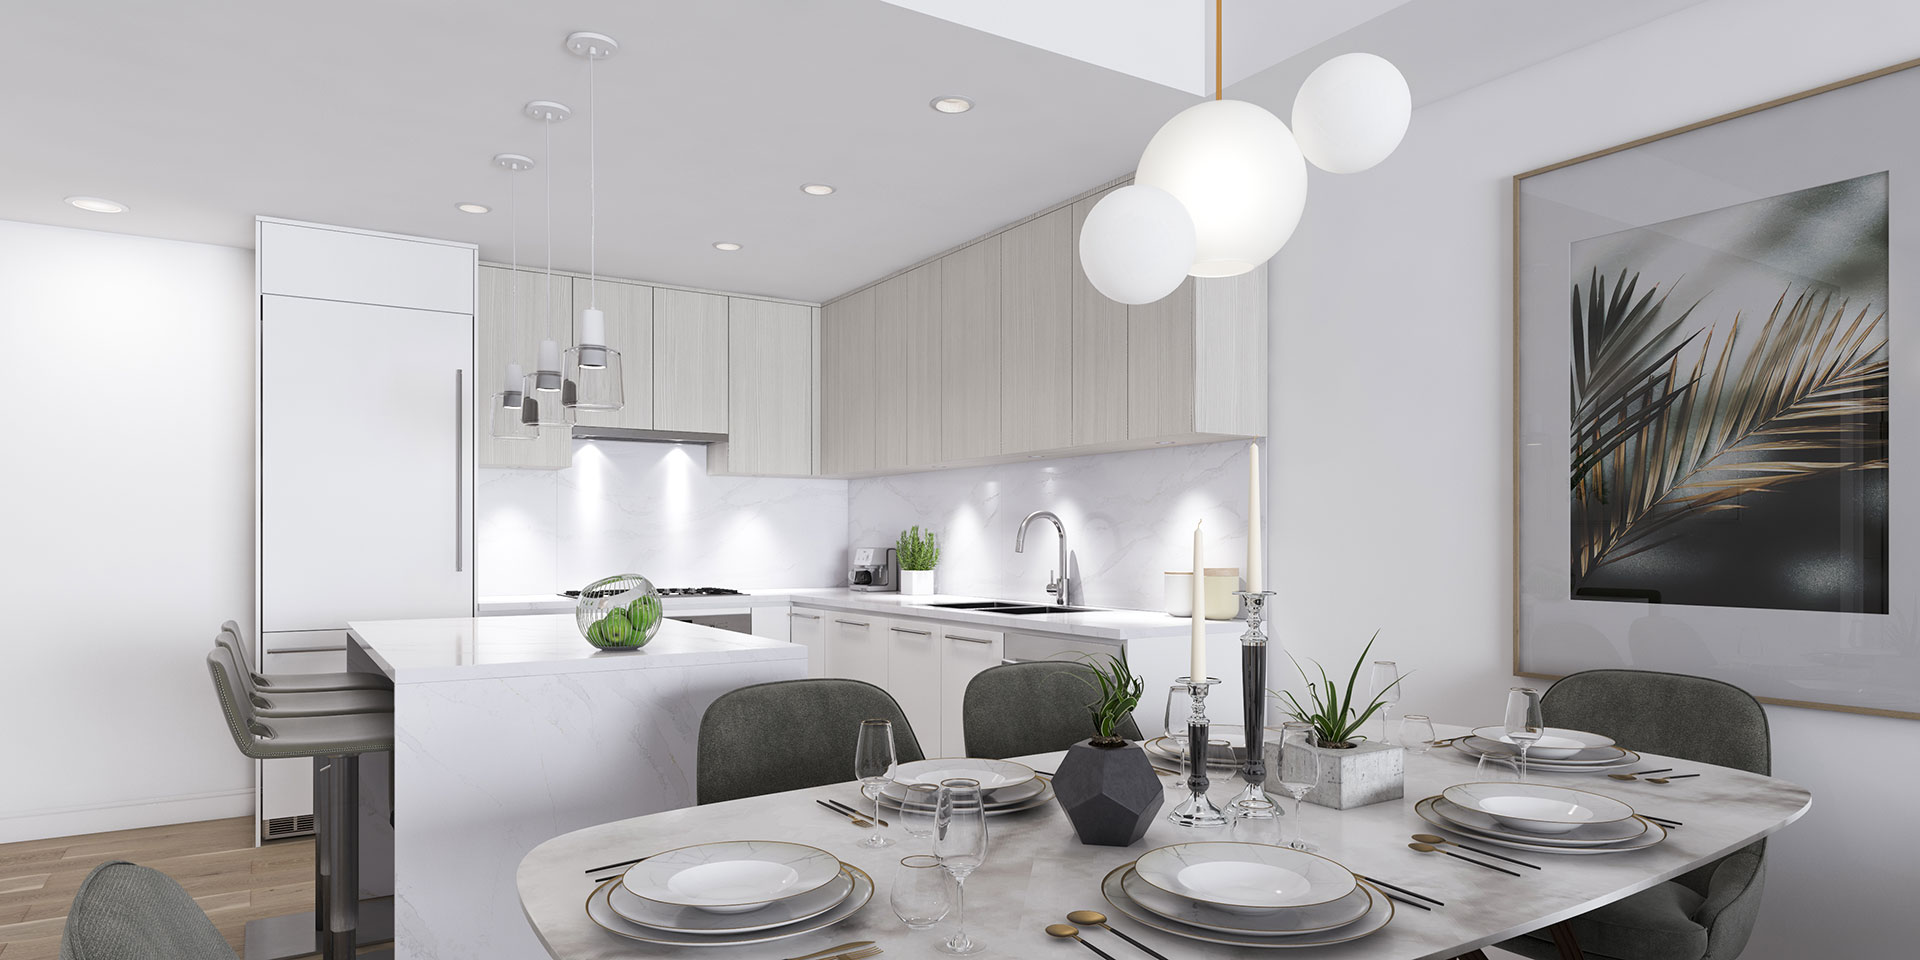 3D Render from Ebb & Flow at Lions Gate Village Project